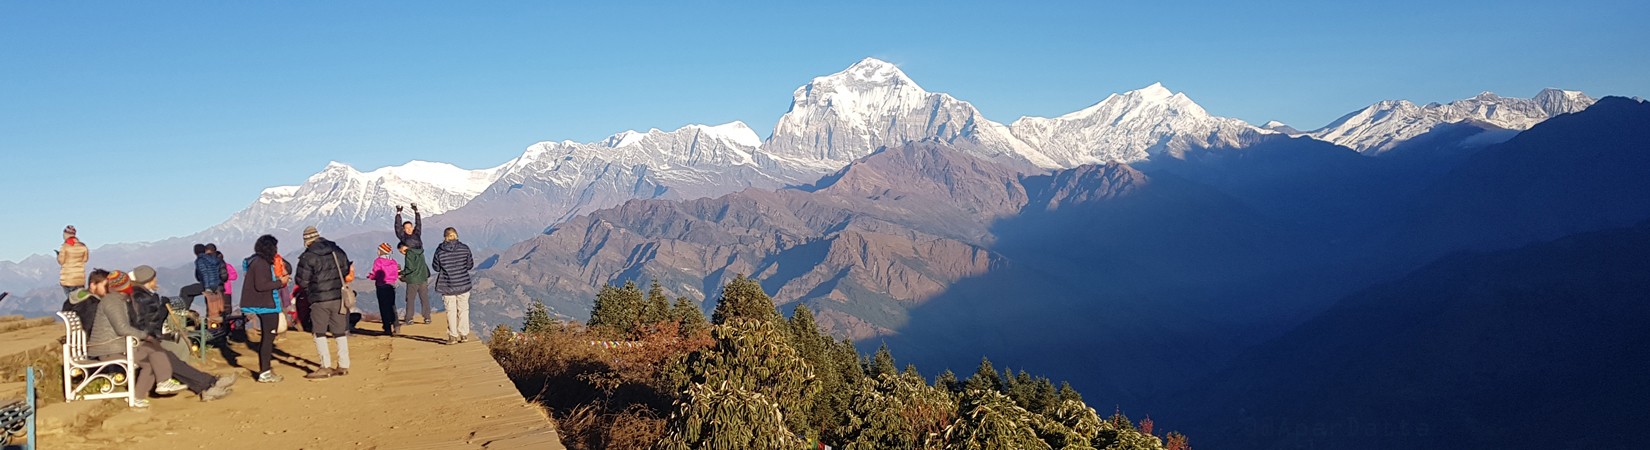 dhaulagiri from poon hill